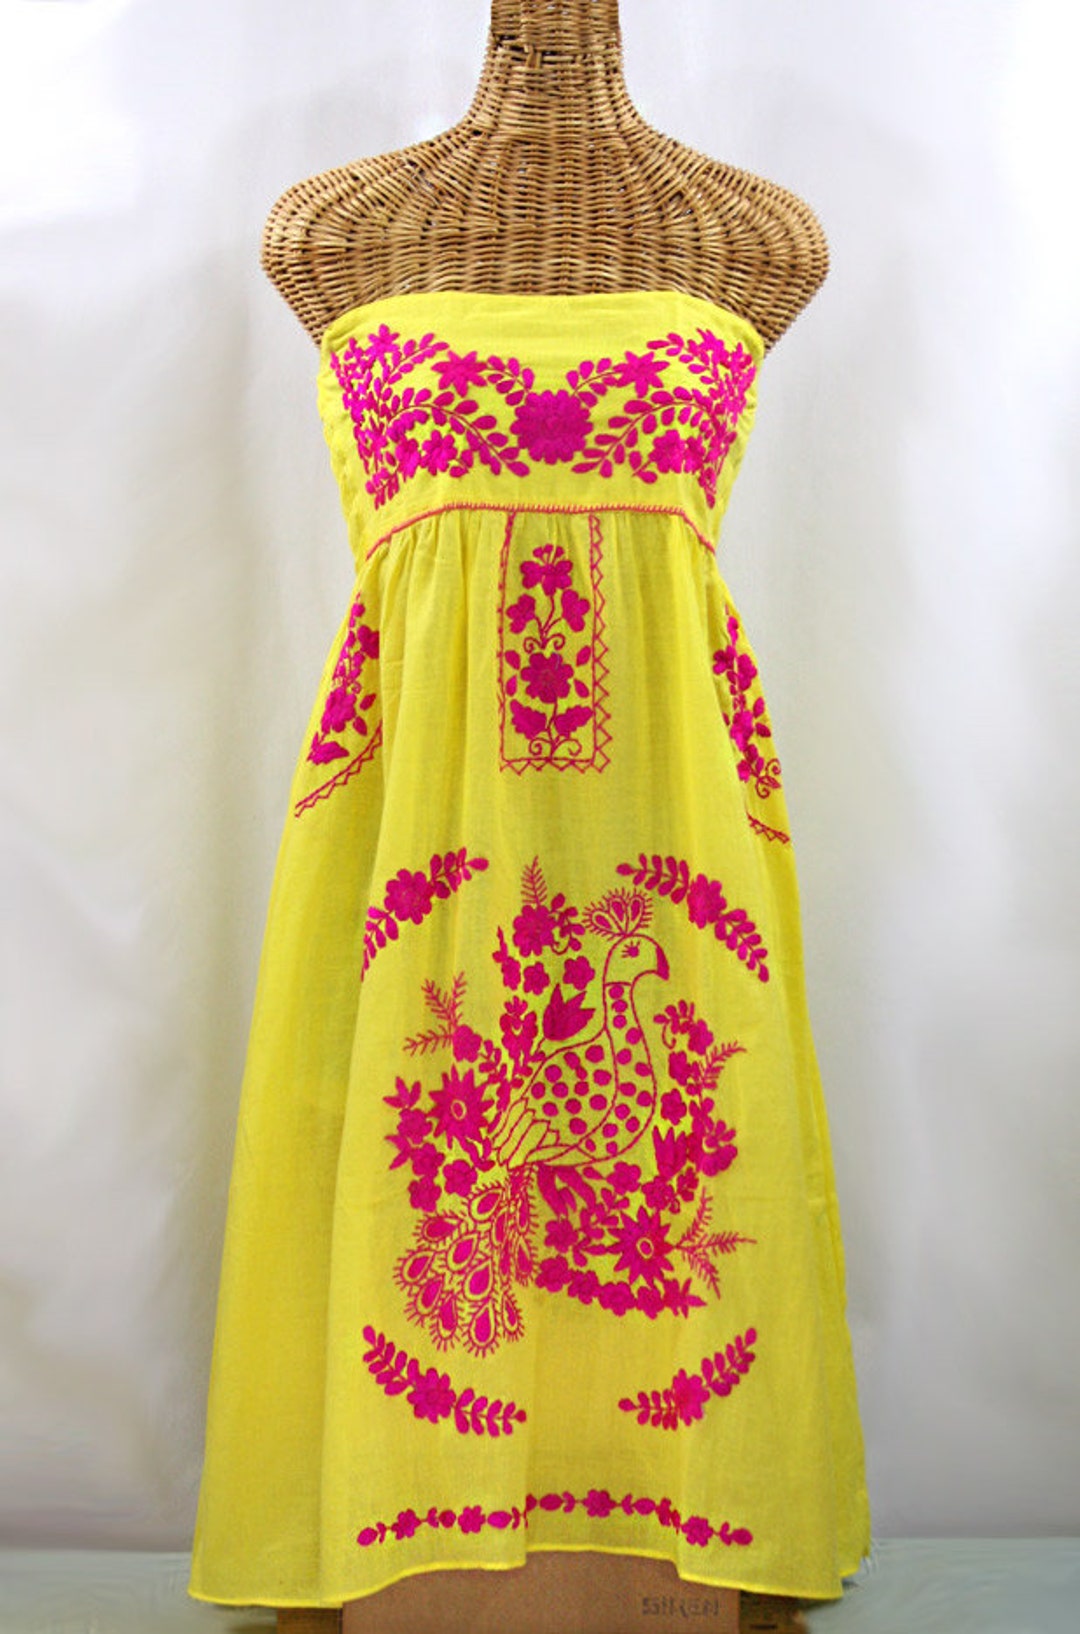 Embroidered Peasant Dress Hand Embroidered Sundress: la - Etsy